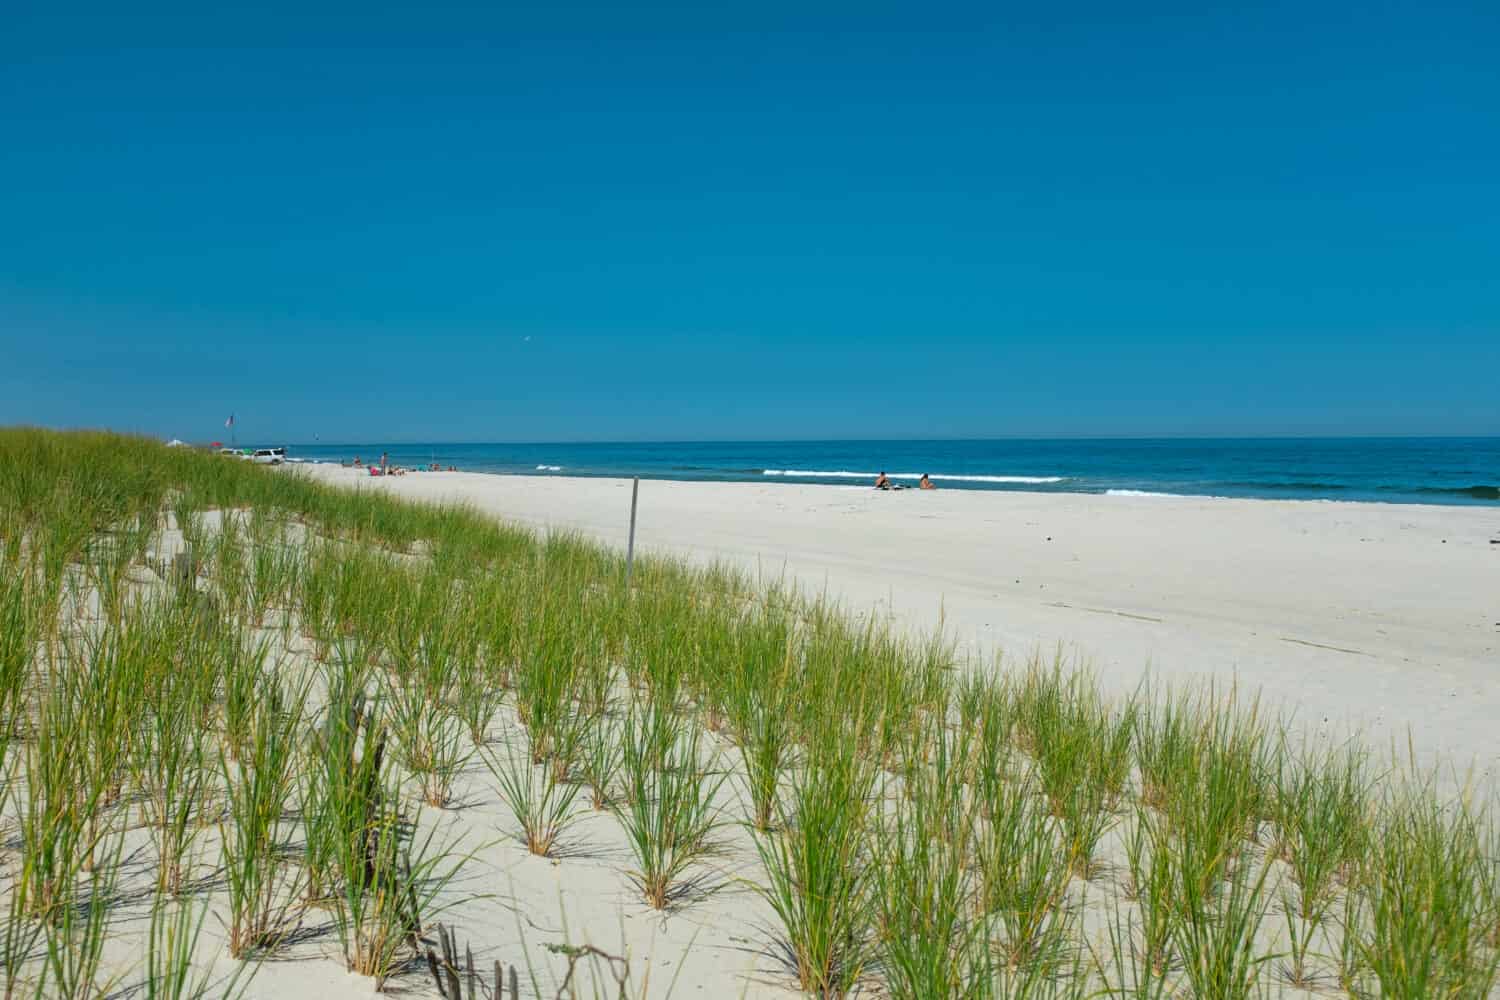 Newly planted American Beachgrass in the Sand Dunes of Island Beach State Park, New Jersey with the Atlantic Ocean in the background on a hot summer day